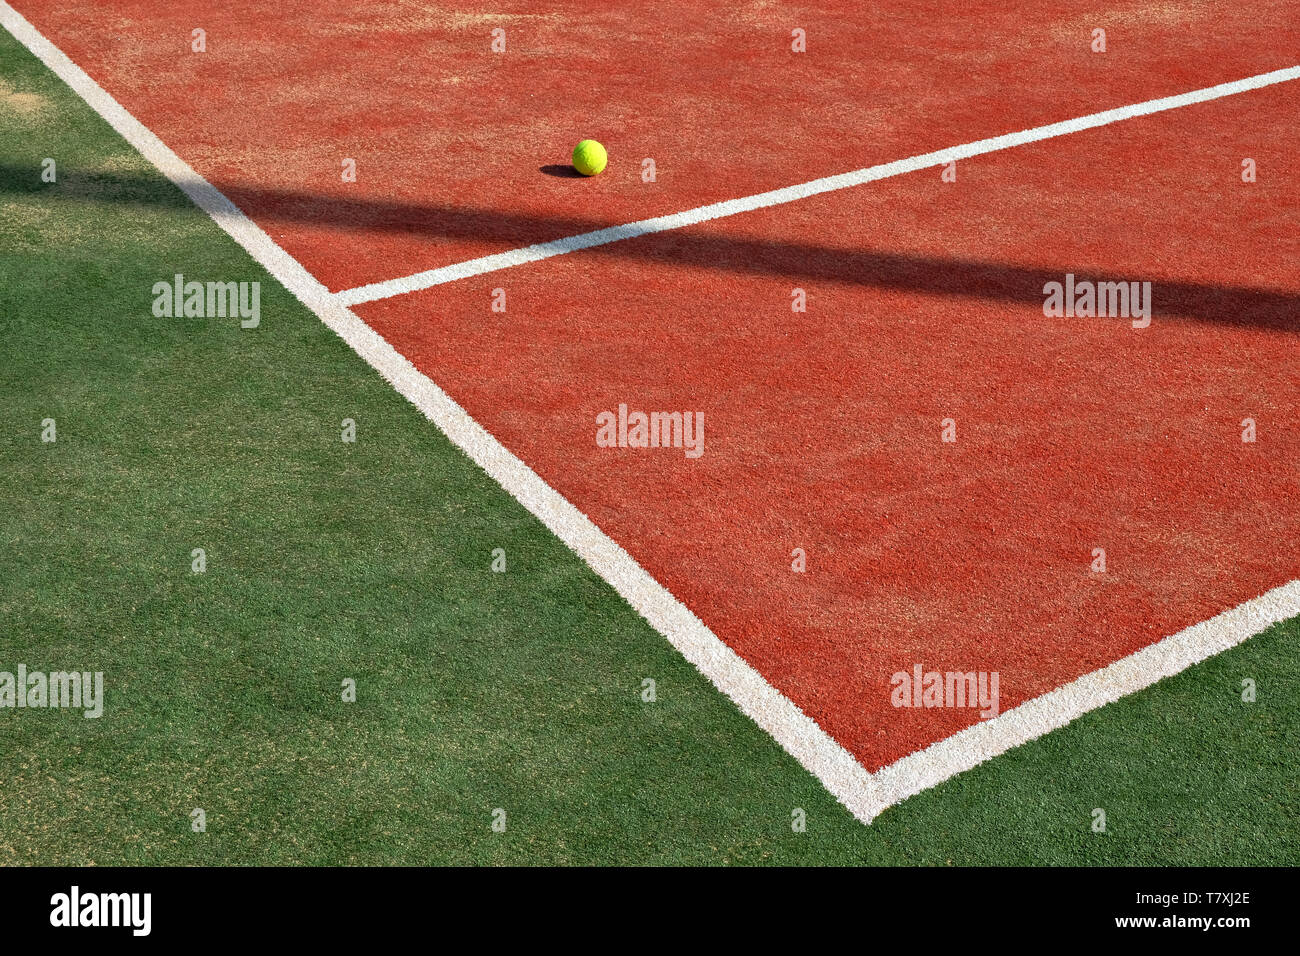 one tennis ball lying on a deserted tennis court Stock Photo